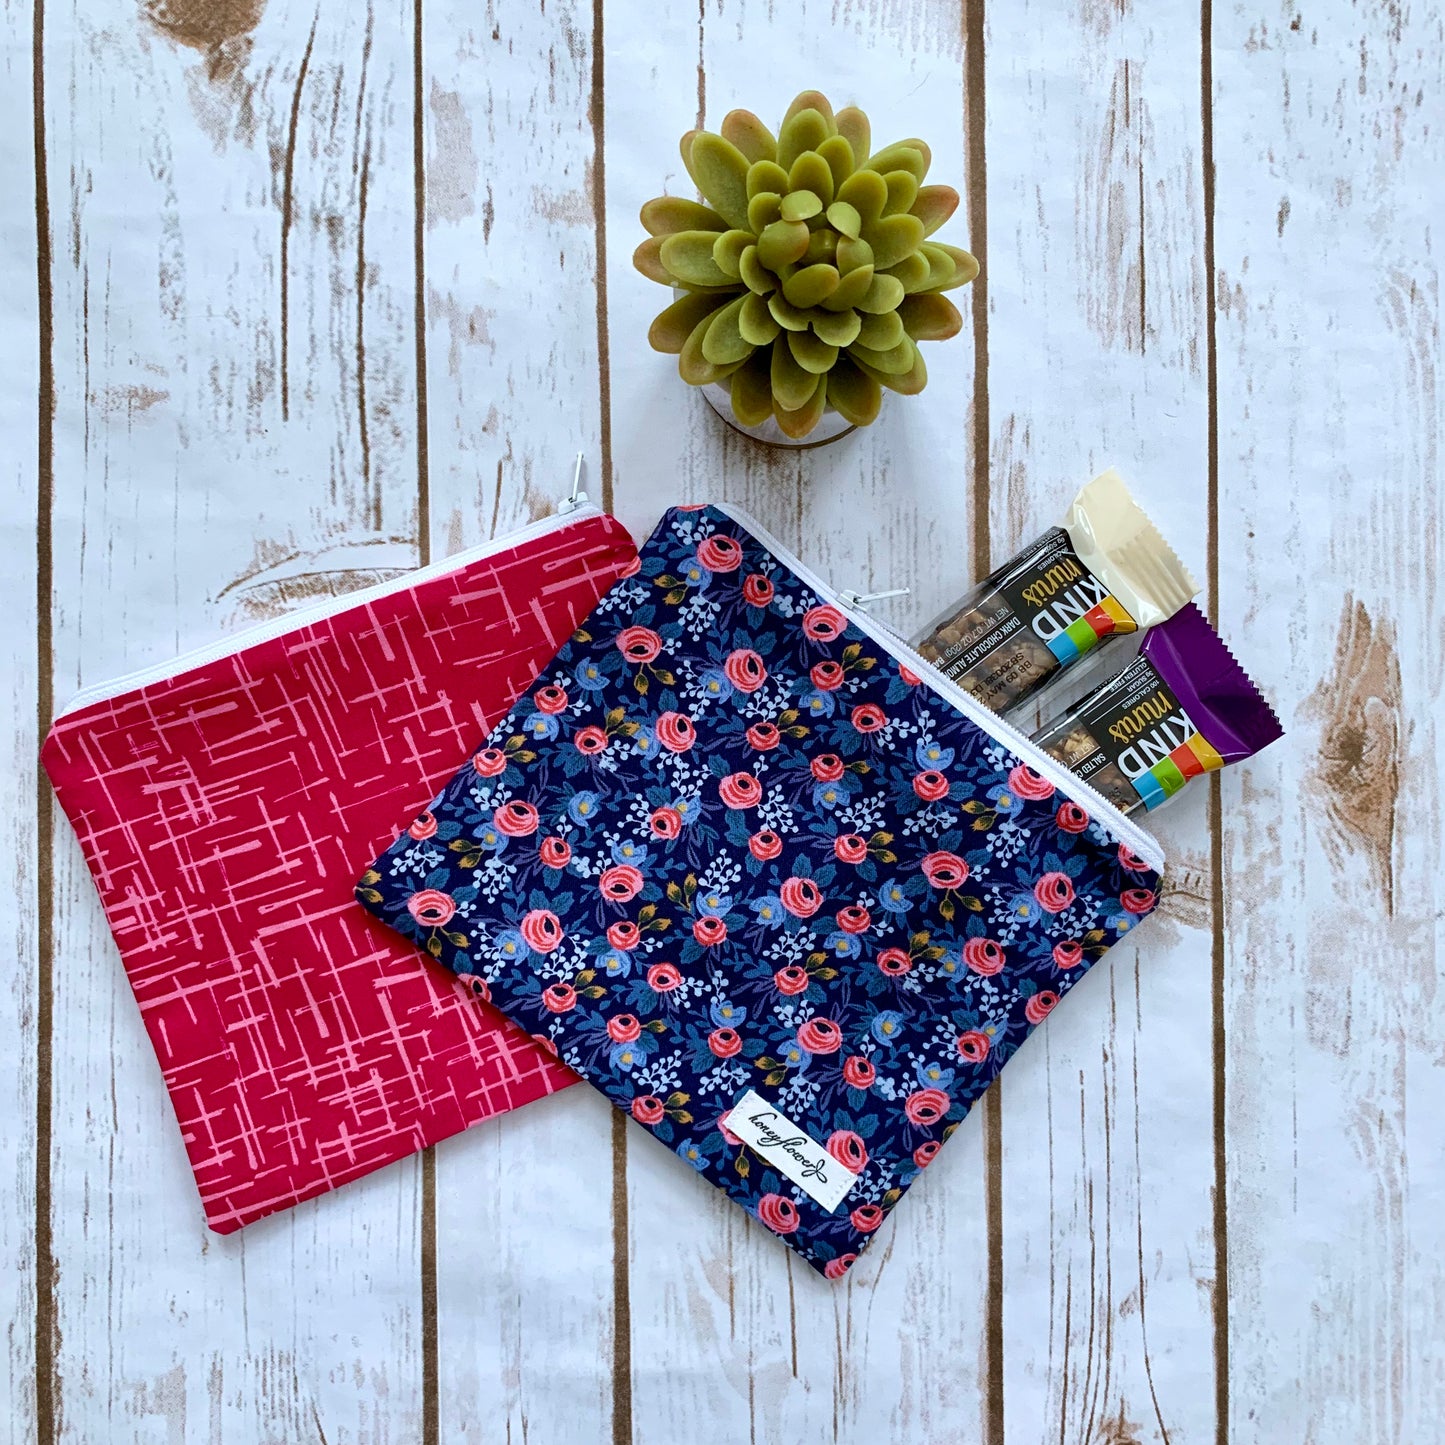 Reusable Snack Pouch | pack of 2 | 100% cotton | choice of floral & nature prints